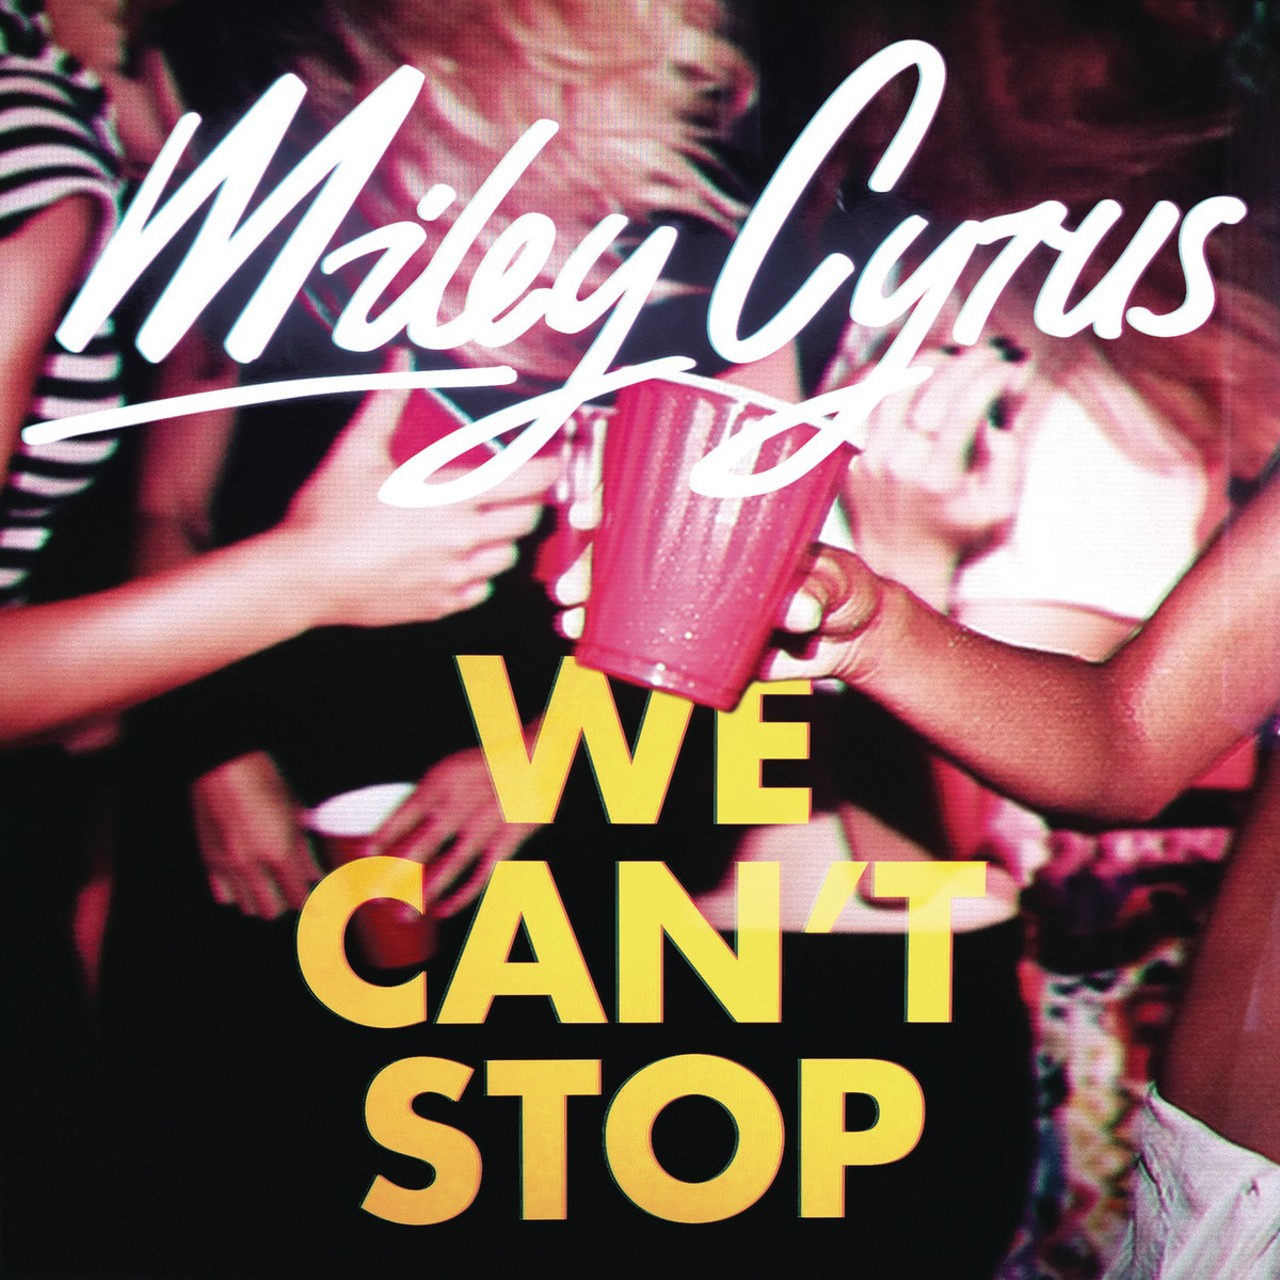 9. Miley Cyrus, "We Can't Stop" (33 Votes)